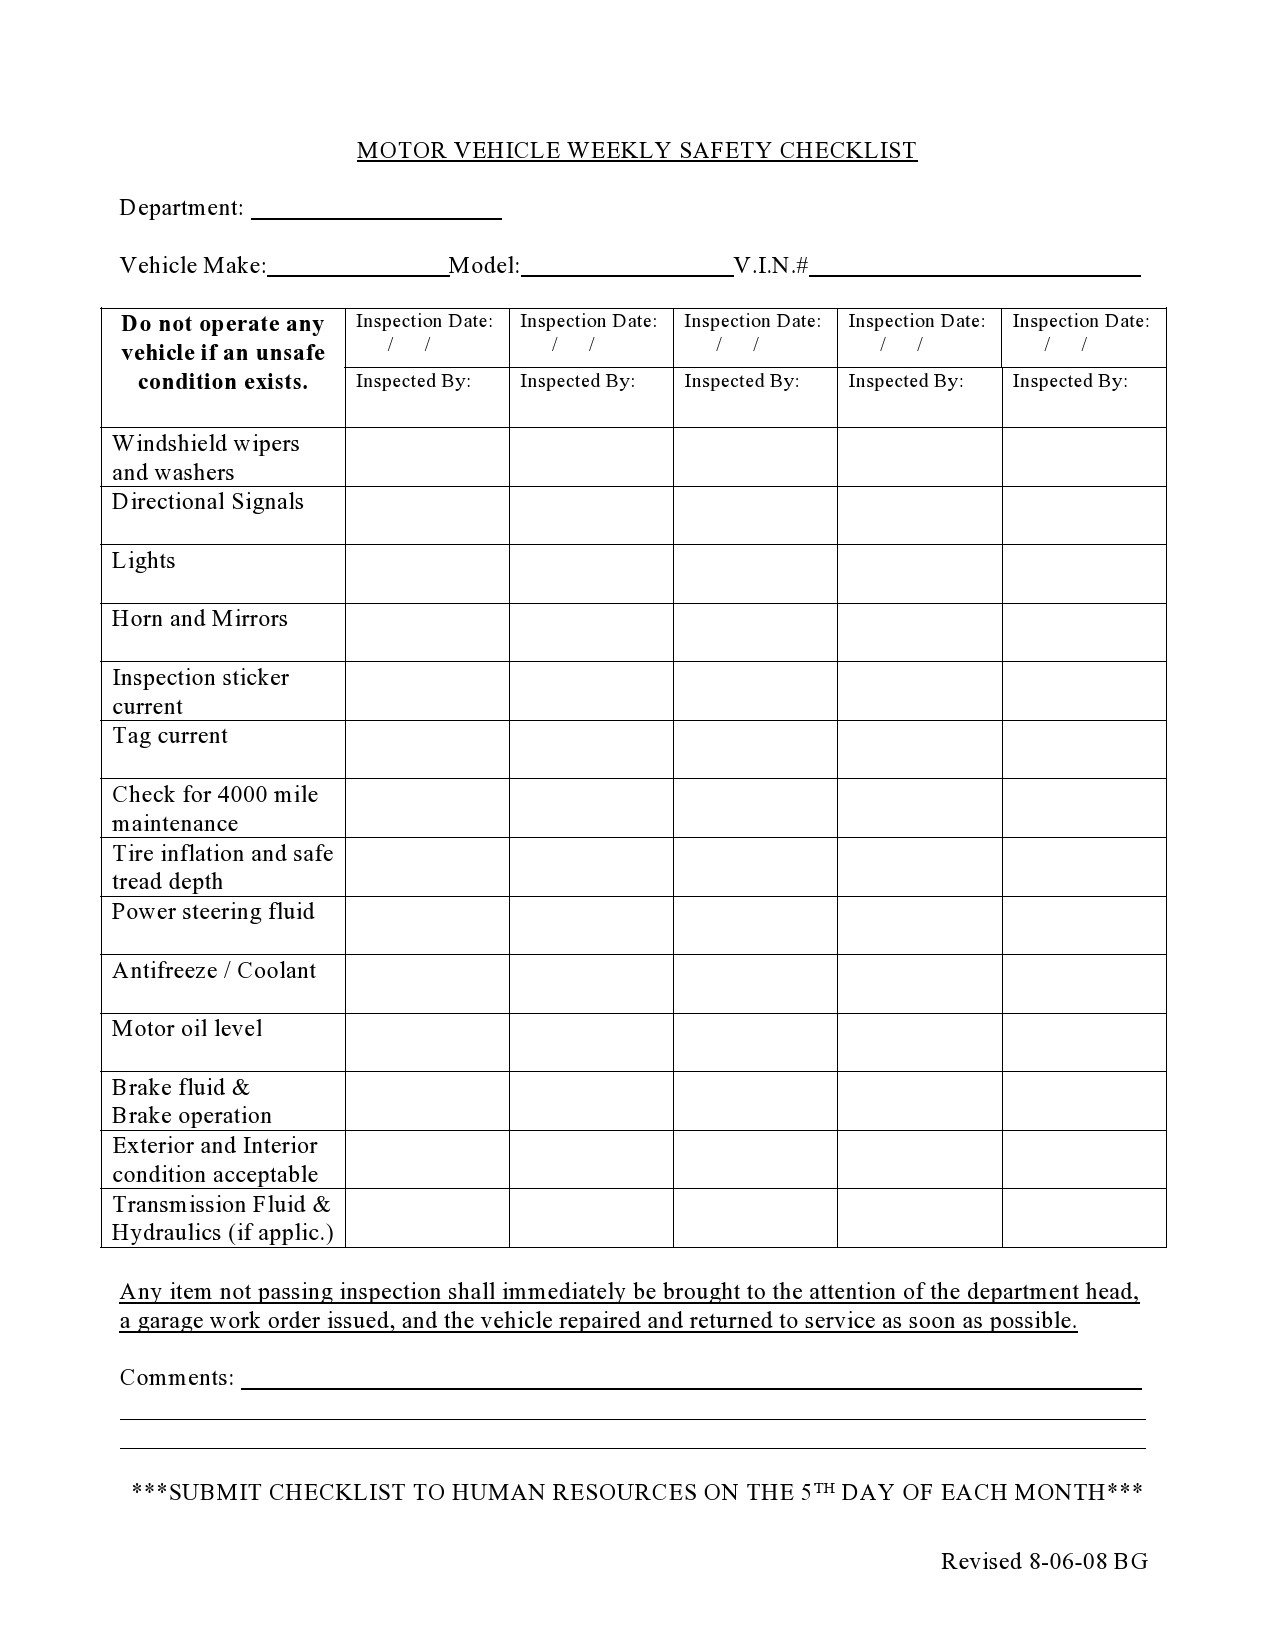 Vehicle Inspection Checklist Template Excel With Daily Vehicle Inspection Checklist Template Within Daily Vehicle Inspection Checklist Template